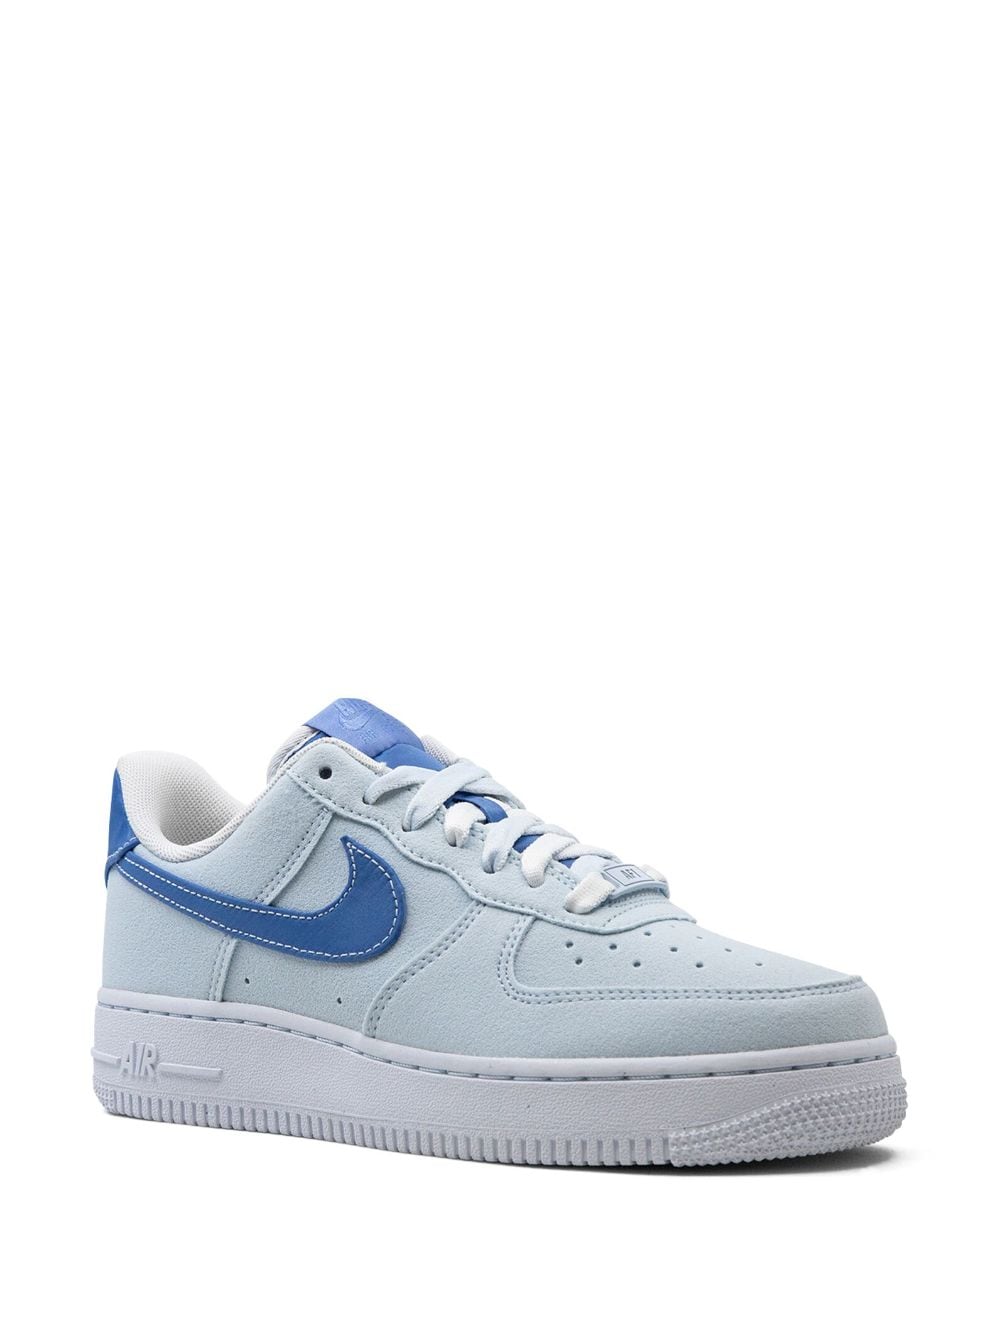 AIR FORCE 1 LOW SHADES OF BLUE 运动鞋